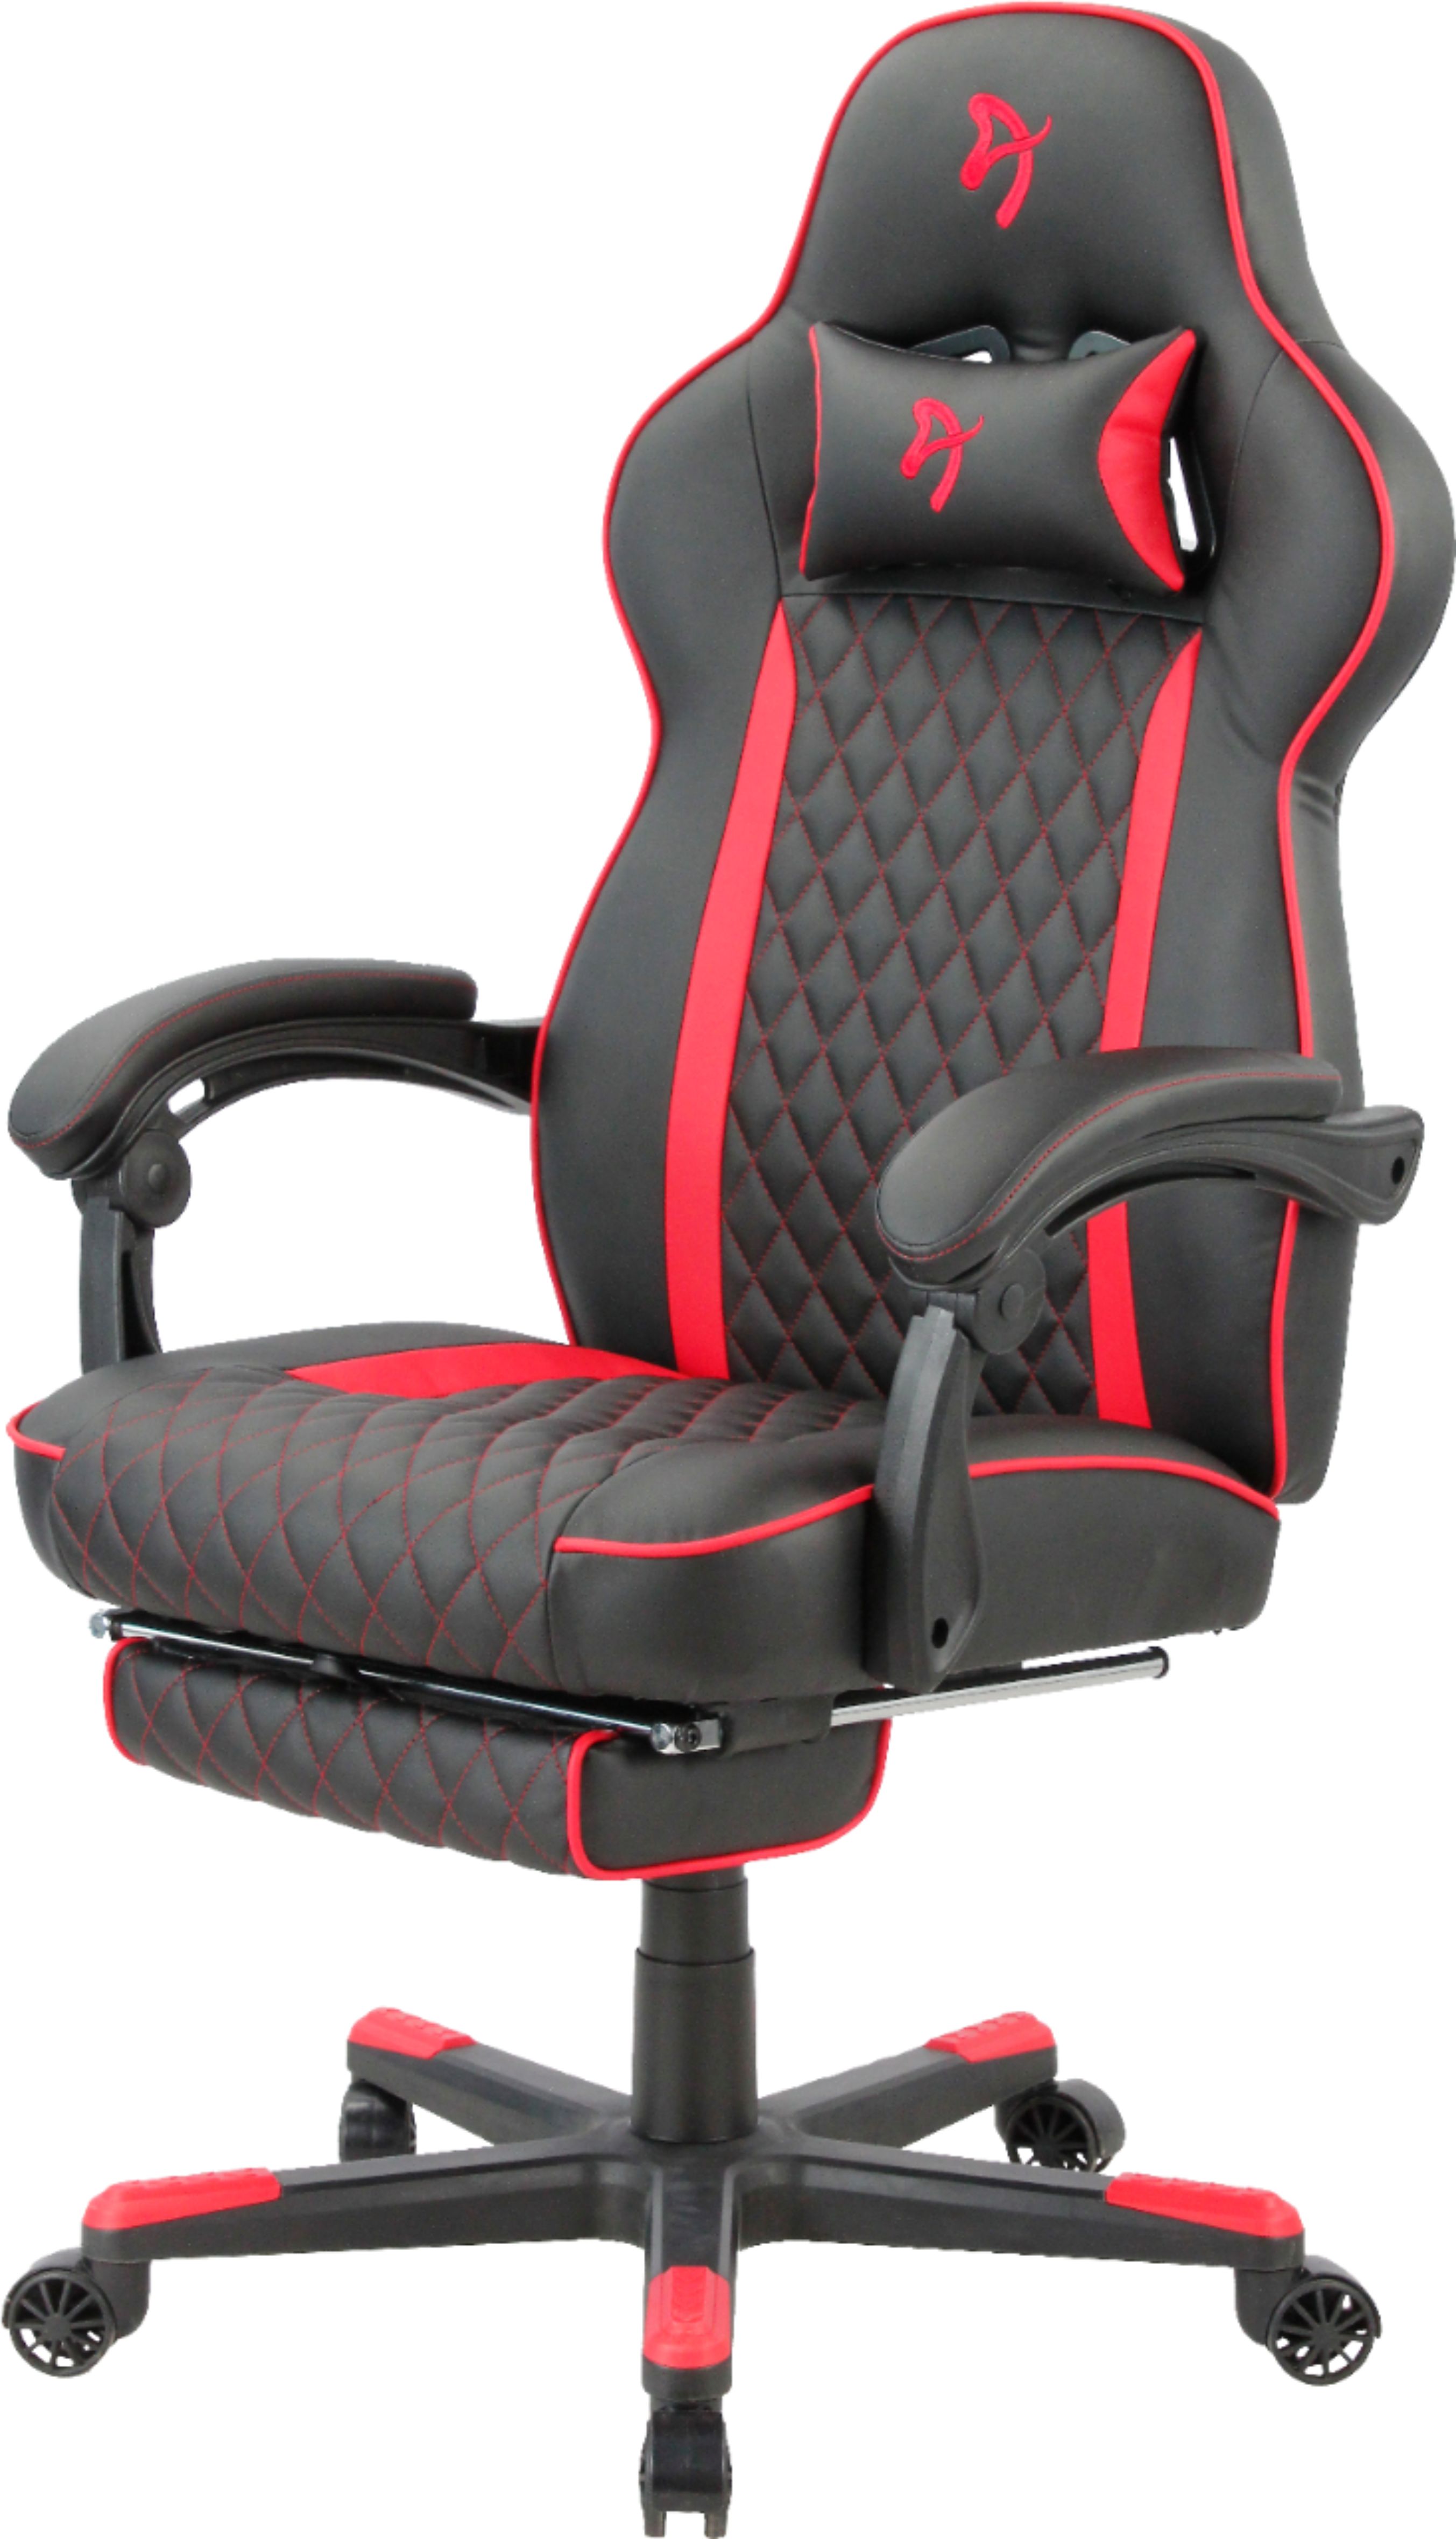 Left View: Arozzi - Primo Premium Woven Fabric Gaming/Office Chair - Dark Grey with Red Accents